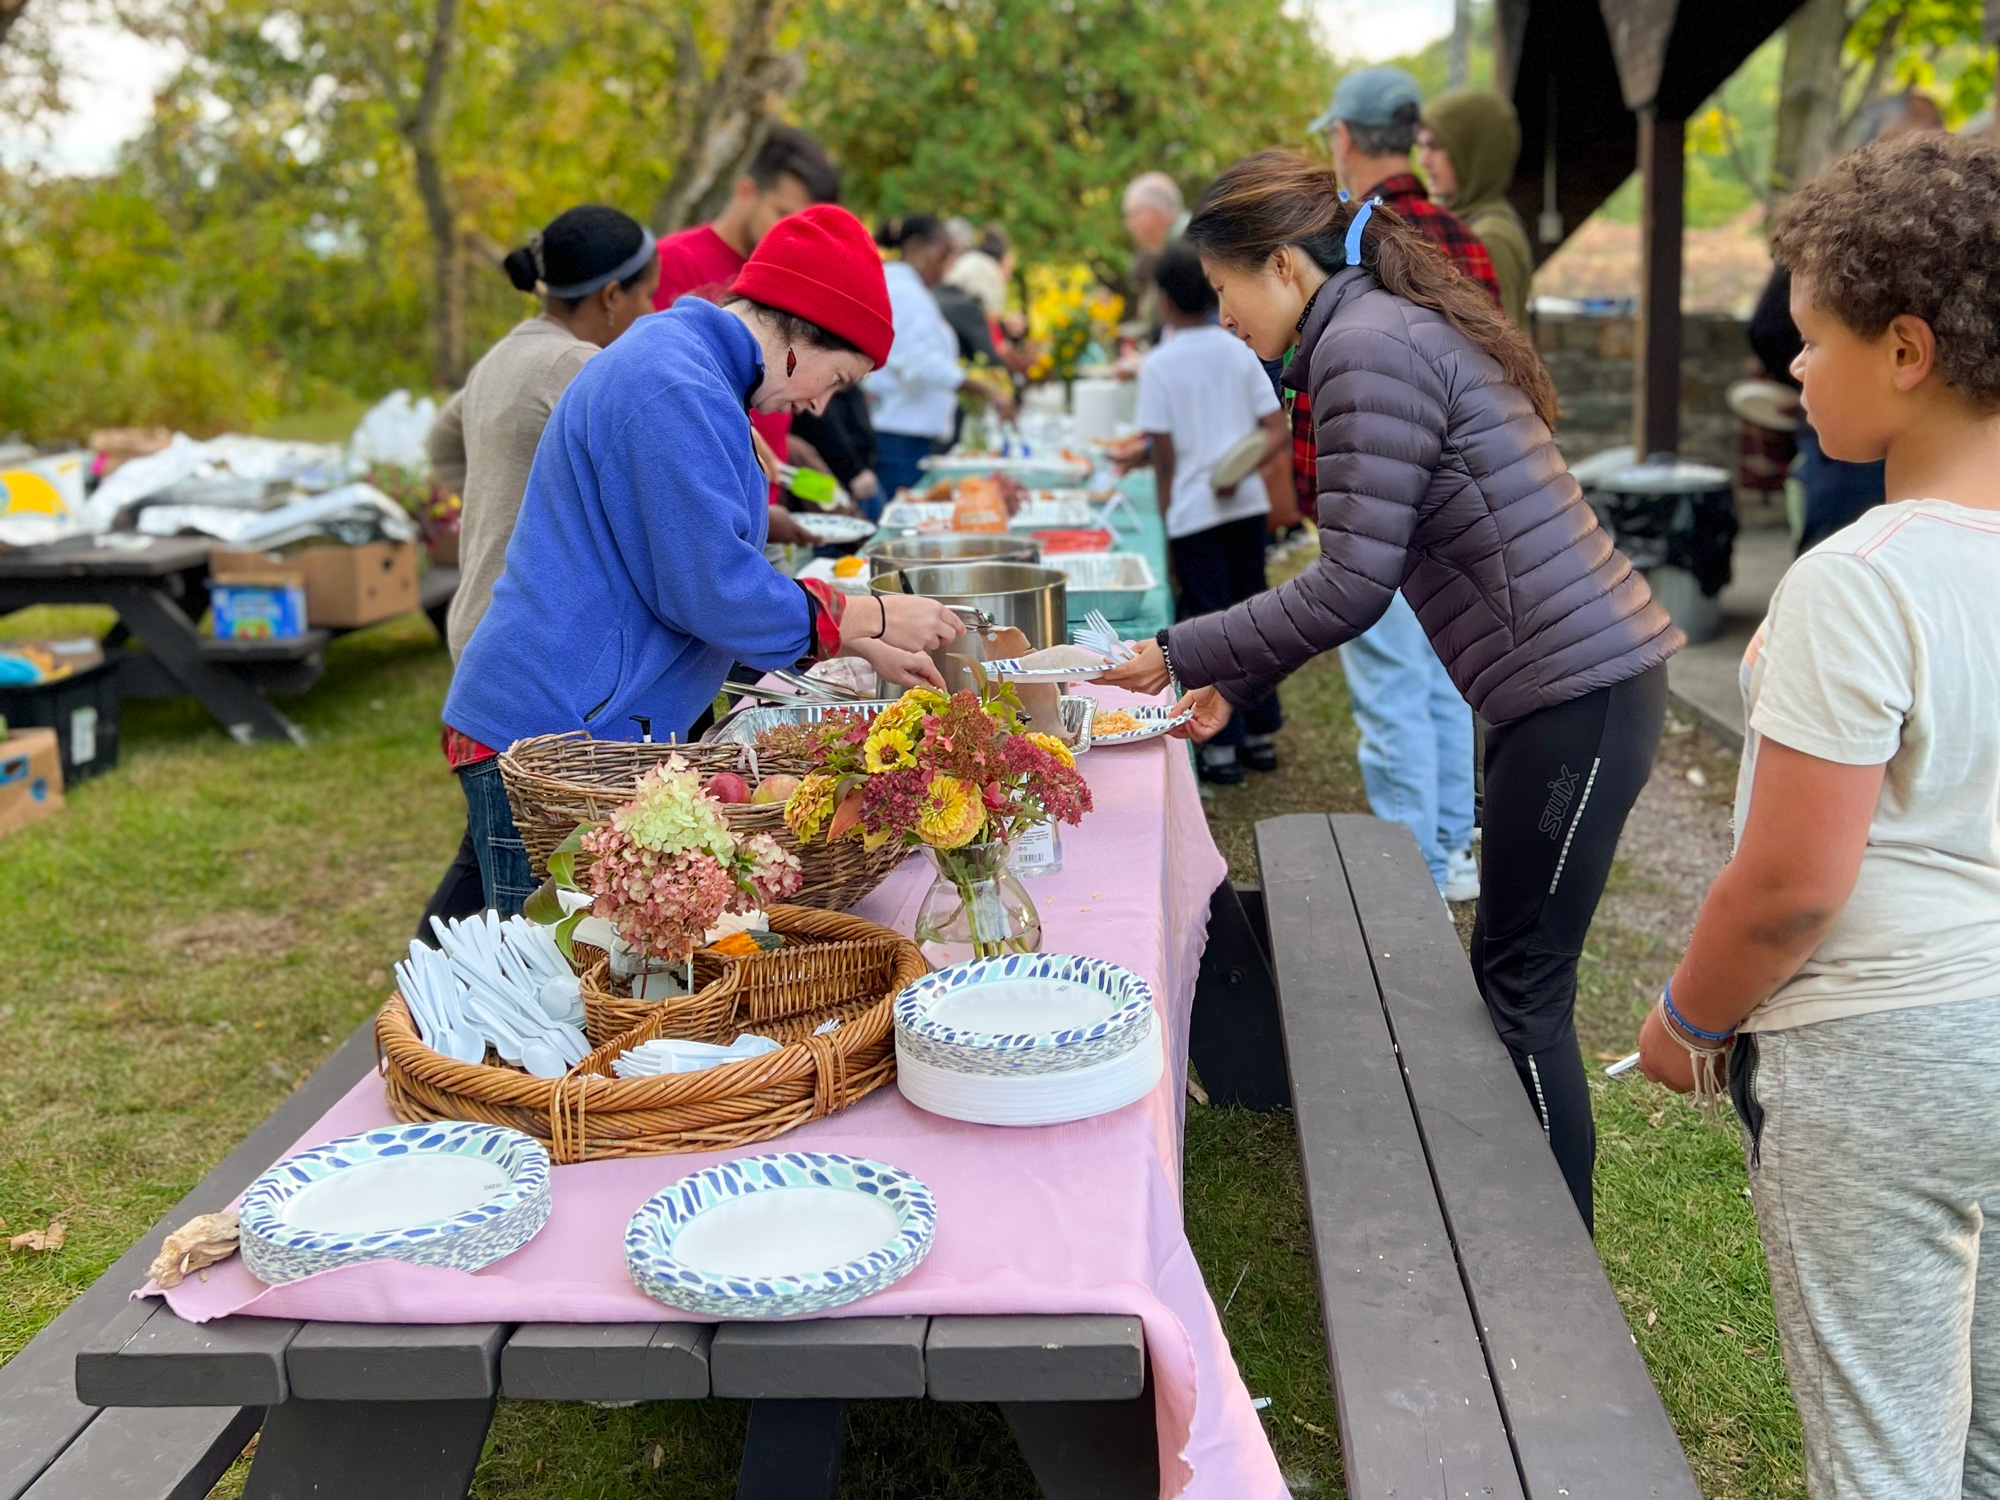 People line up at picnic tables, full of food to share